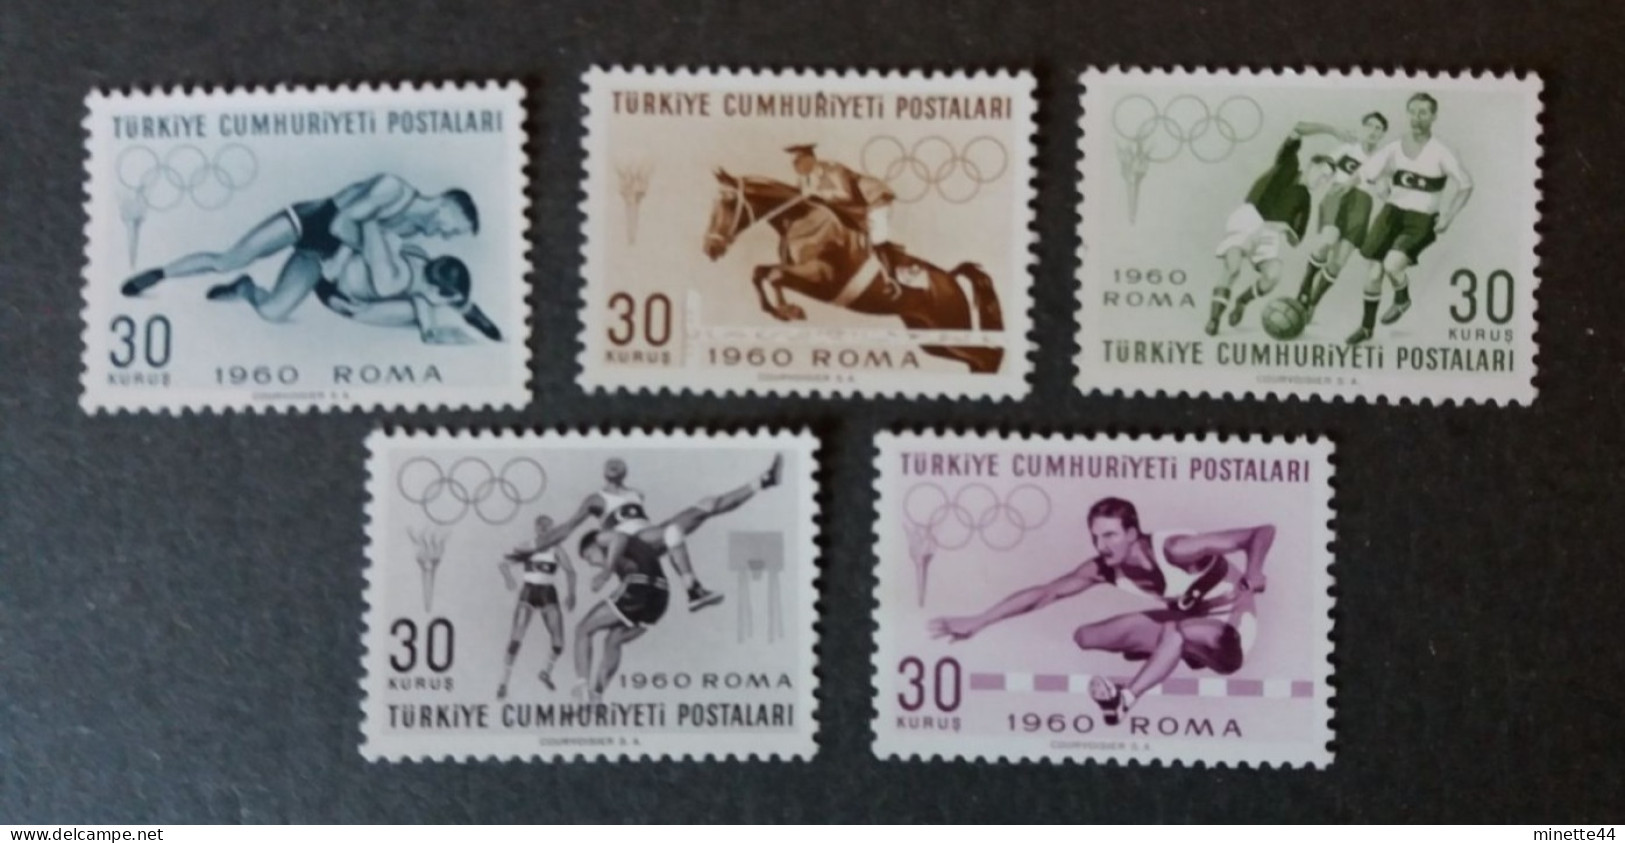 TURQUIE TURKEY 1960 MNH**  GAMES JEUX LUTTE JUMPING ATHLETISME  BASKET FOOTBALL SPORTS - Sommer 1960: Rom